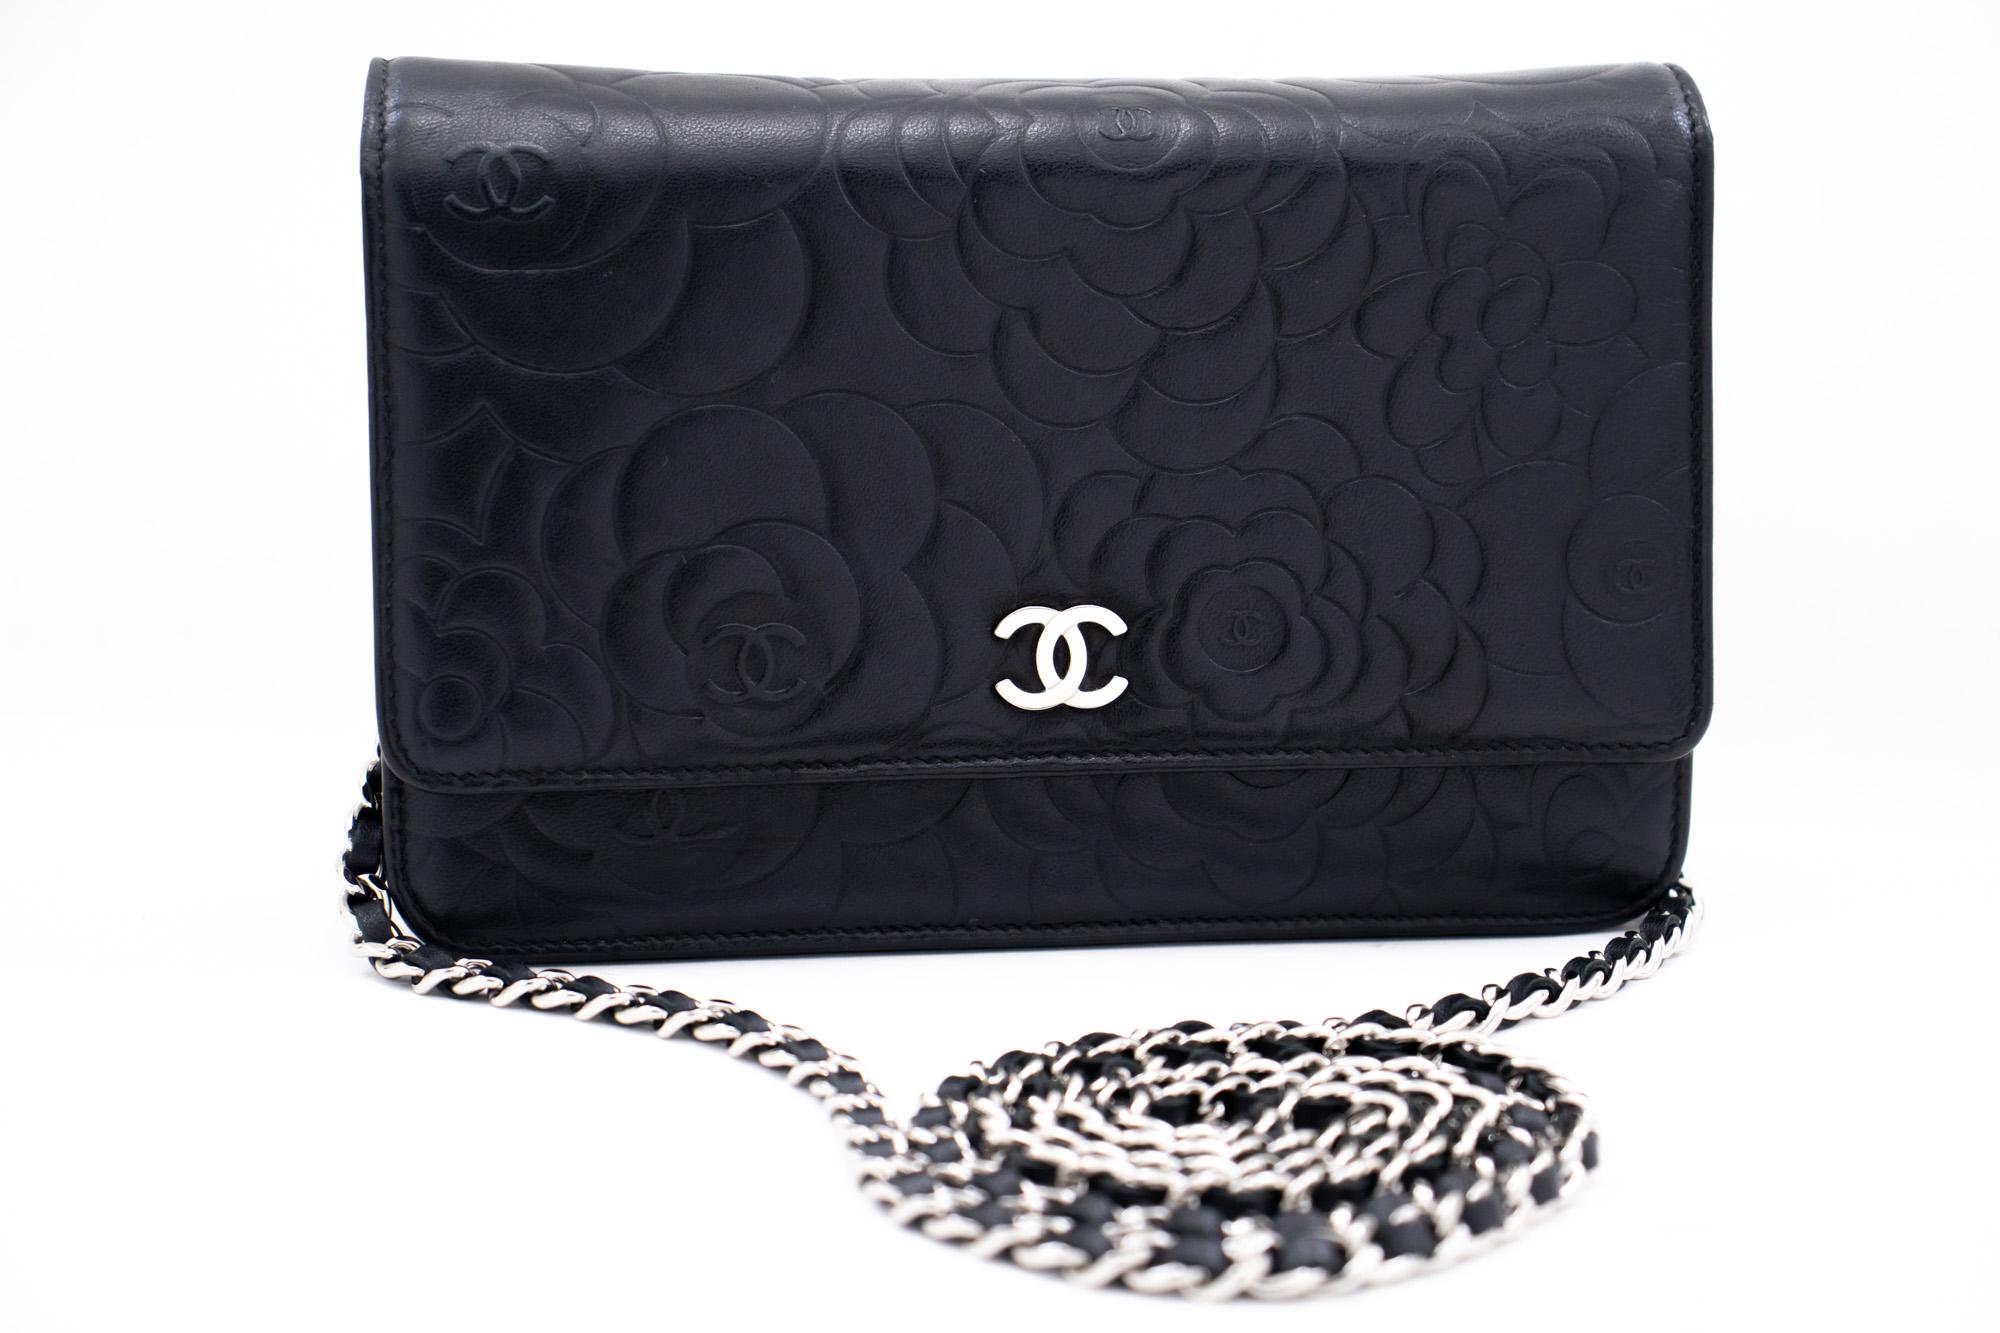 An authentic CHANEL Black Camellia Embossed Wallet On Chain WOC Shoulder Bag. The color is Black. The outside material is Leather. The pattern is Embossed. This item is Contemporary. The year of manufacture would be 2012.
Conditions &